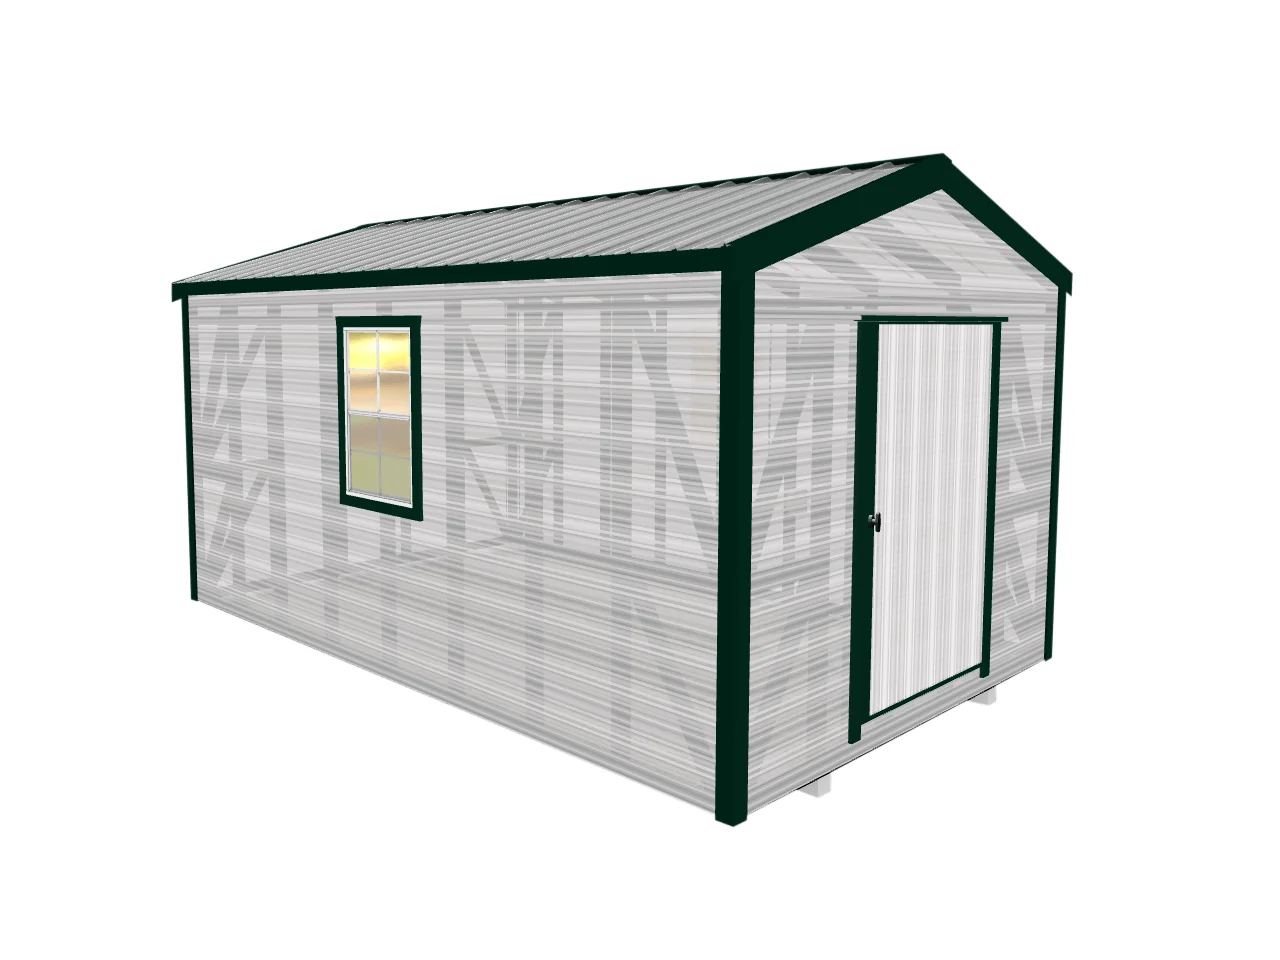 This potting shed allows you to get ahead in your garden game to enjoy for years to come.